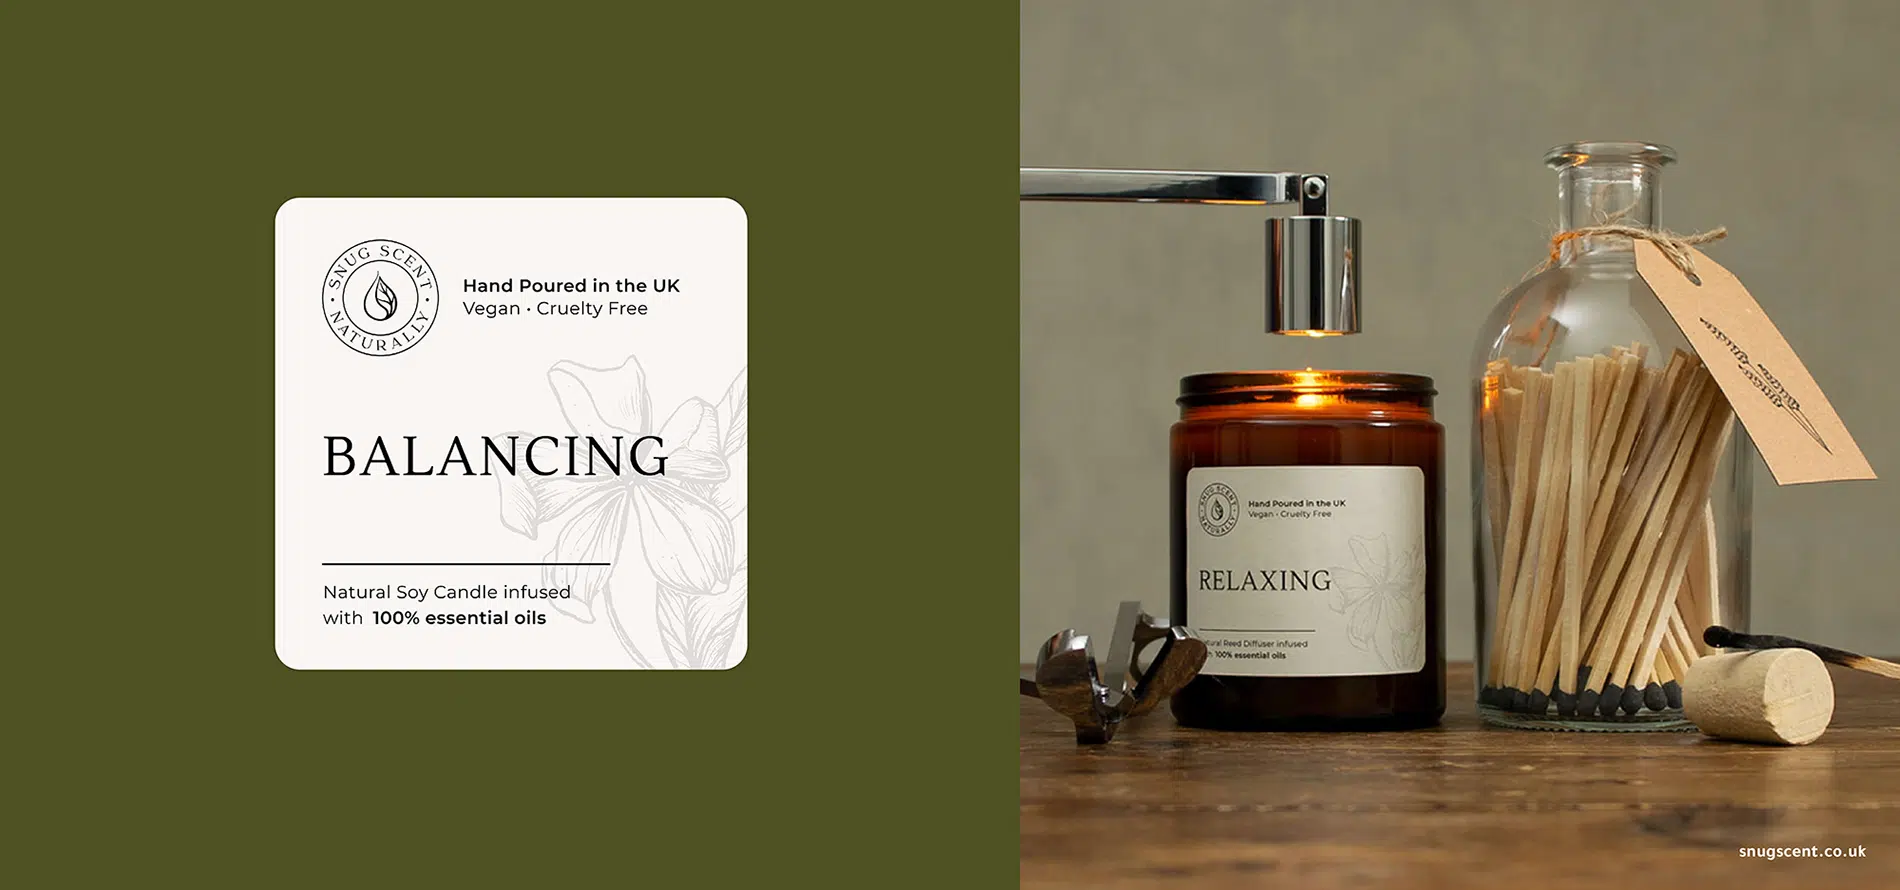 snug scent label design for a candle brand